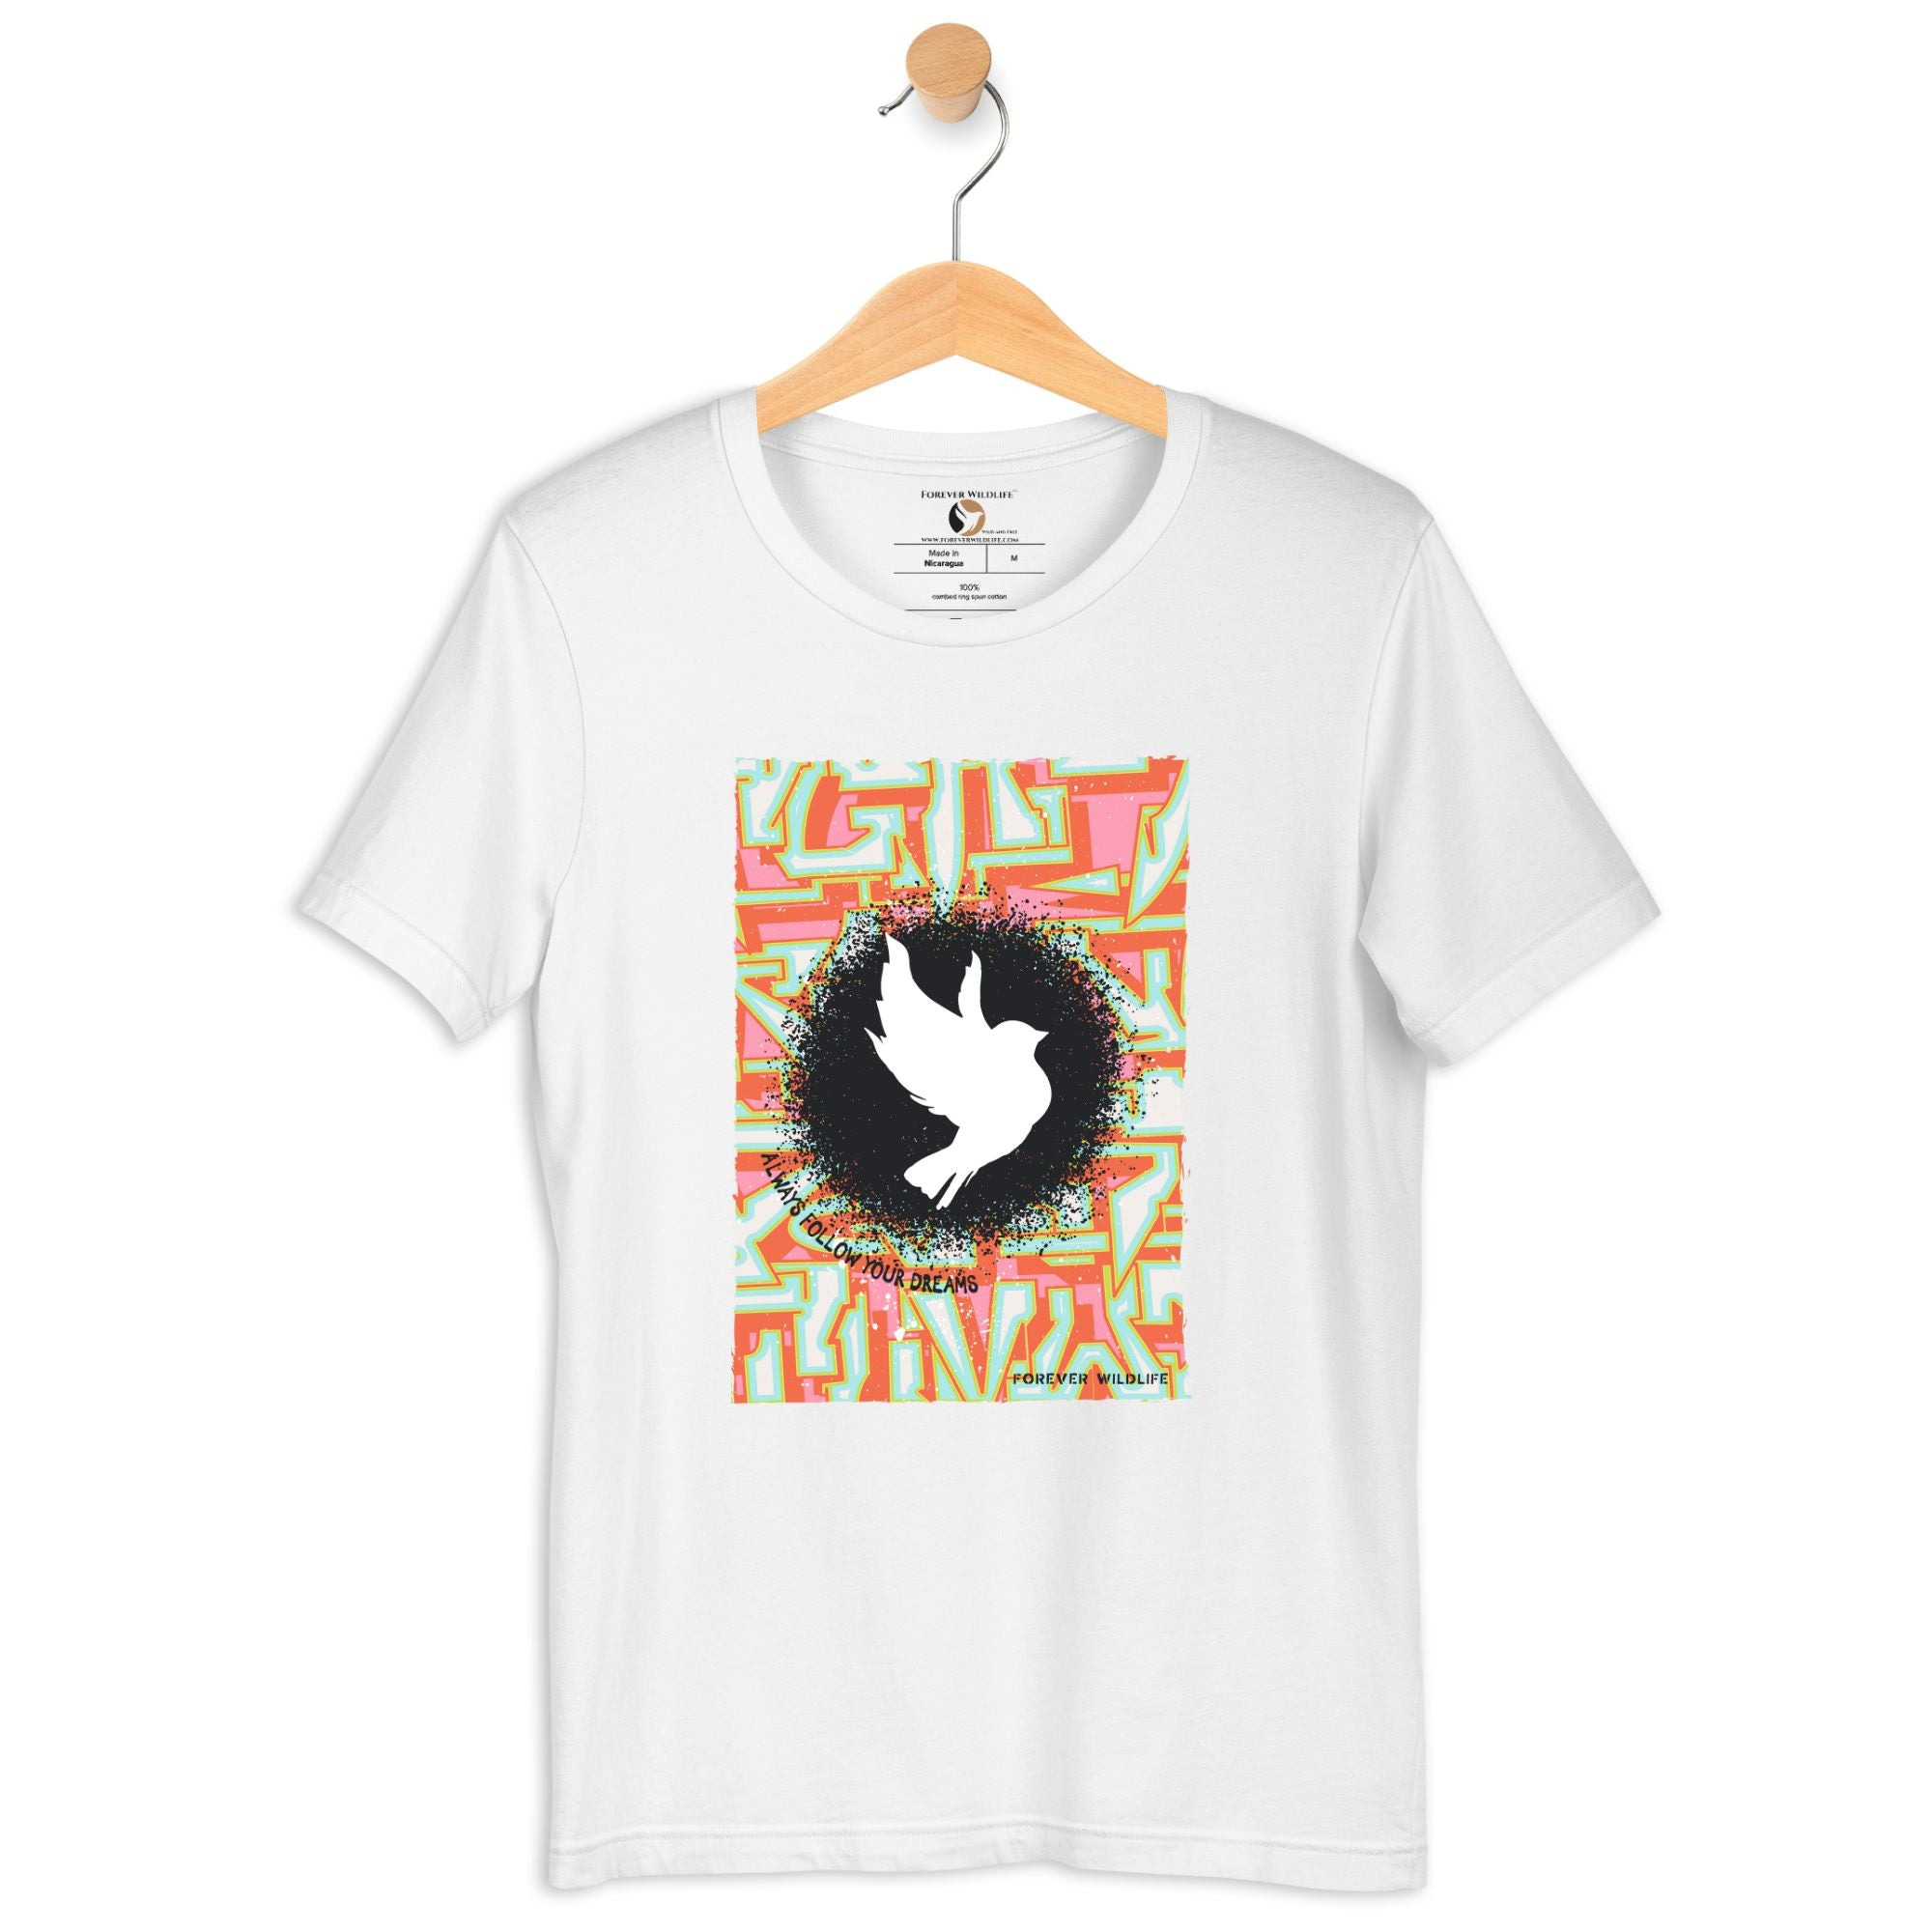 Dove Shirt in White - High-Quality Wildlife Inspirational T-Shirt Design, Wildlife Clothing from Forever Wildlife